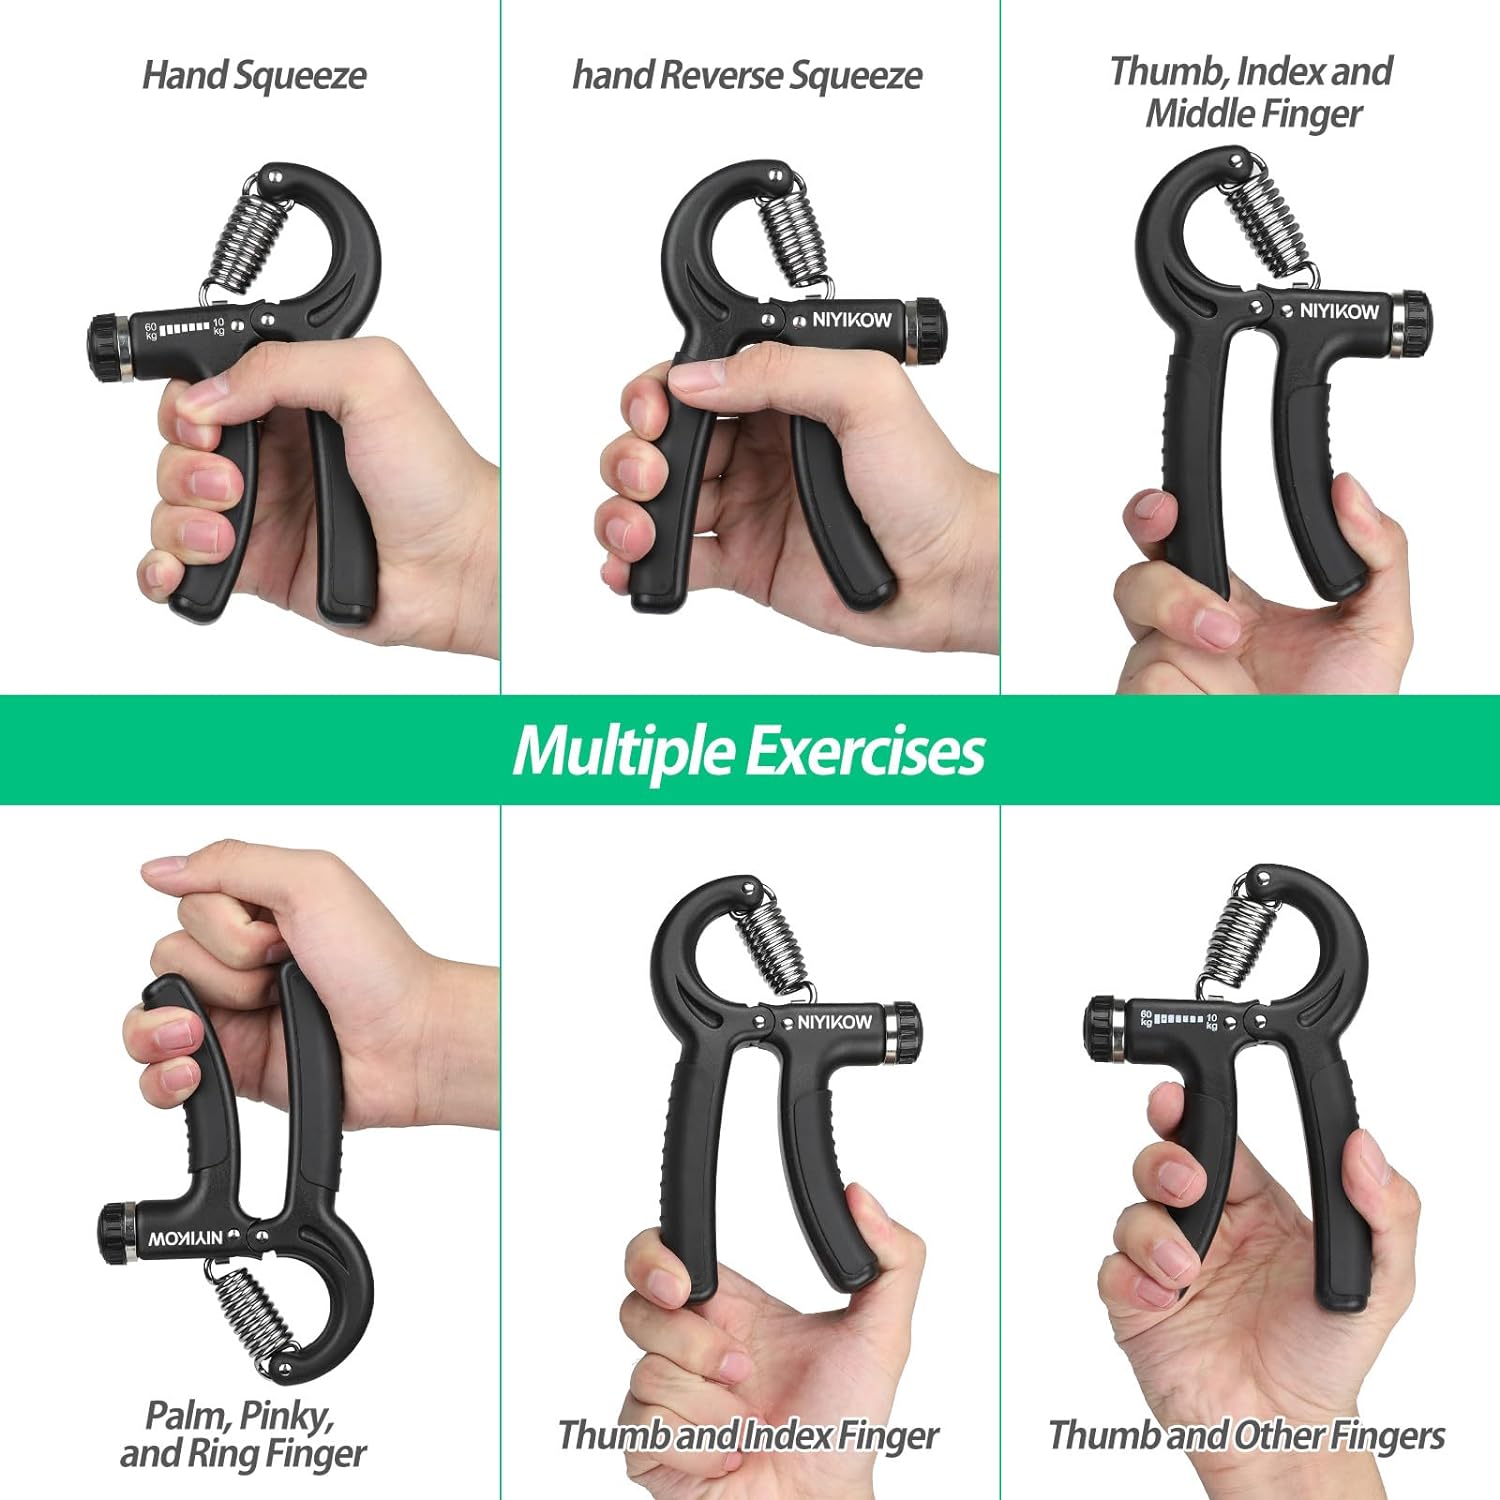 NIYIKOW Grip Strength Trainer, Hand Grip Strengthener, Adjustable Resistance 22-132Lbs (10-60kg), Non-Slip Gripper, Perfect for Musicians Athletes and Hand Rehabilitation Exercising